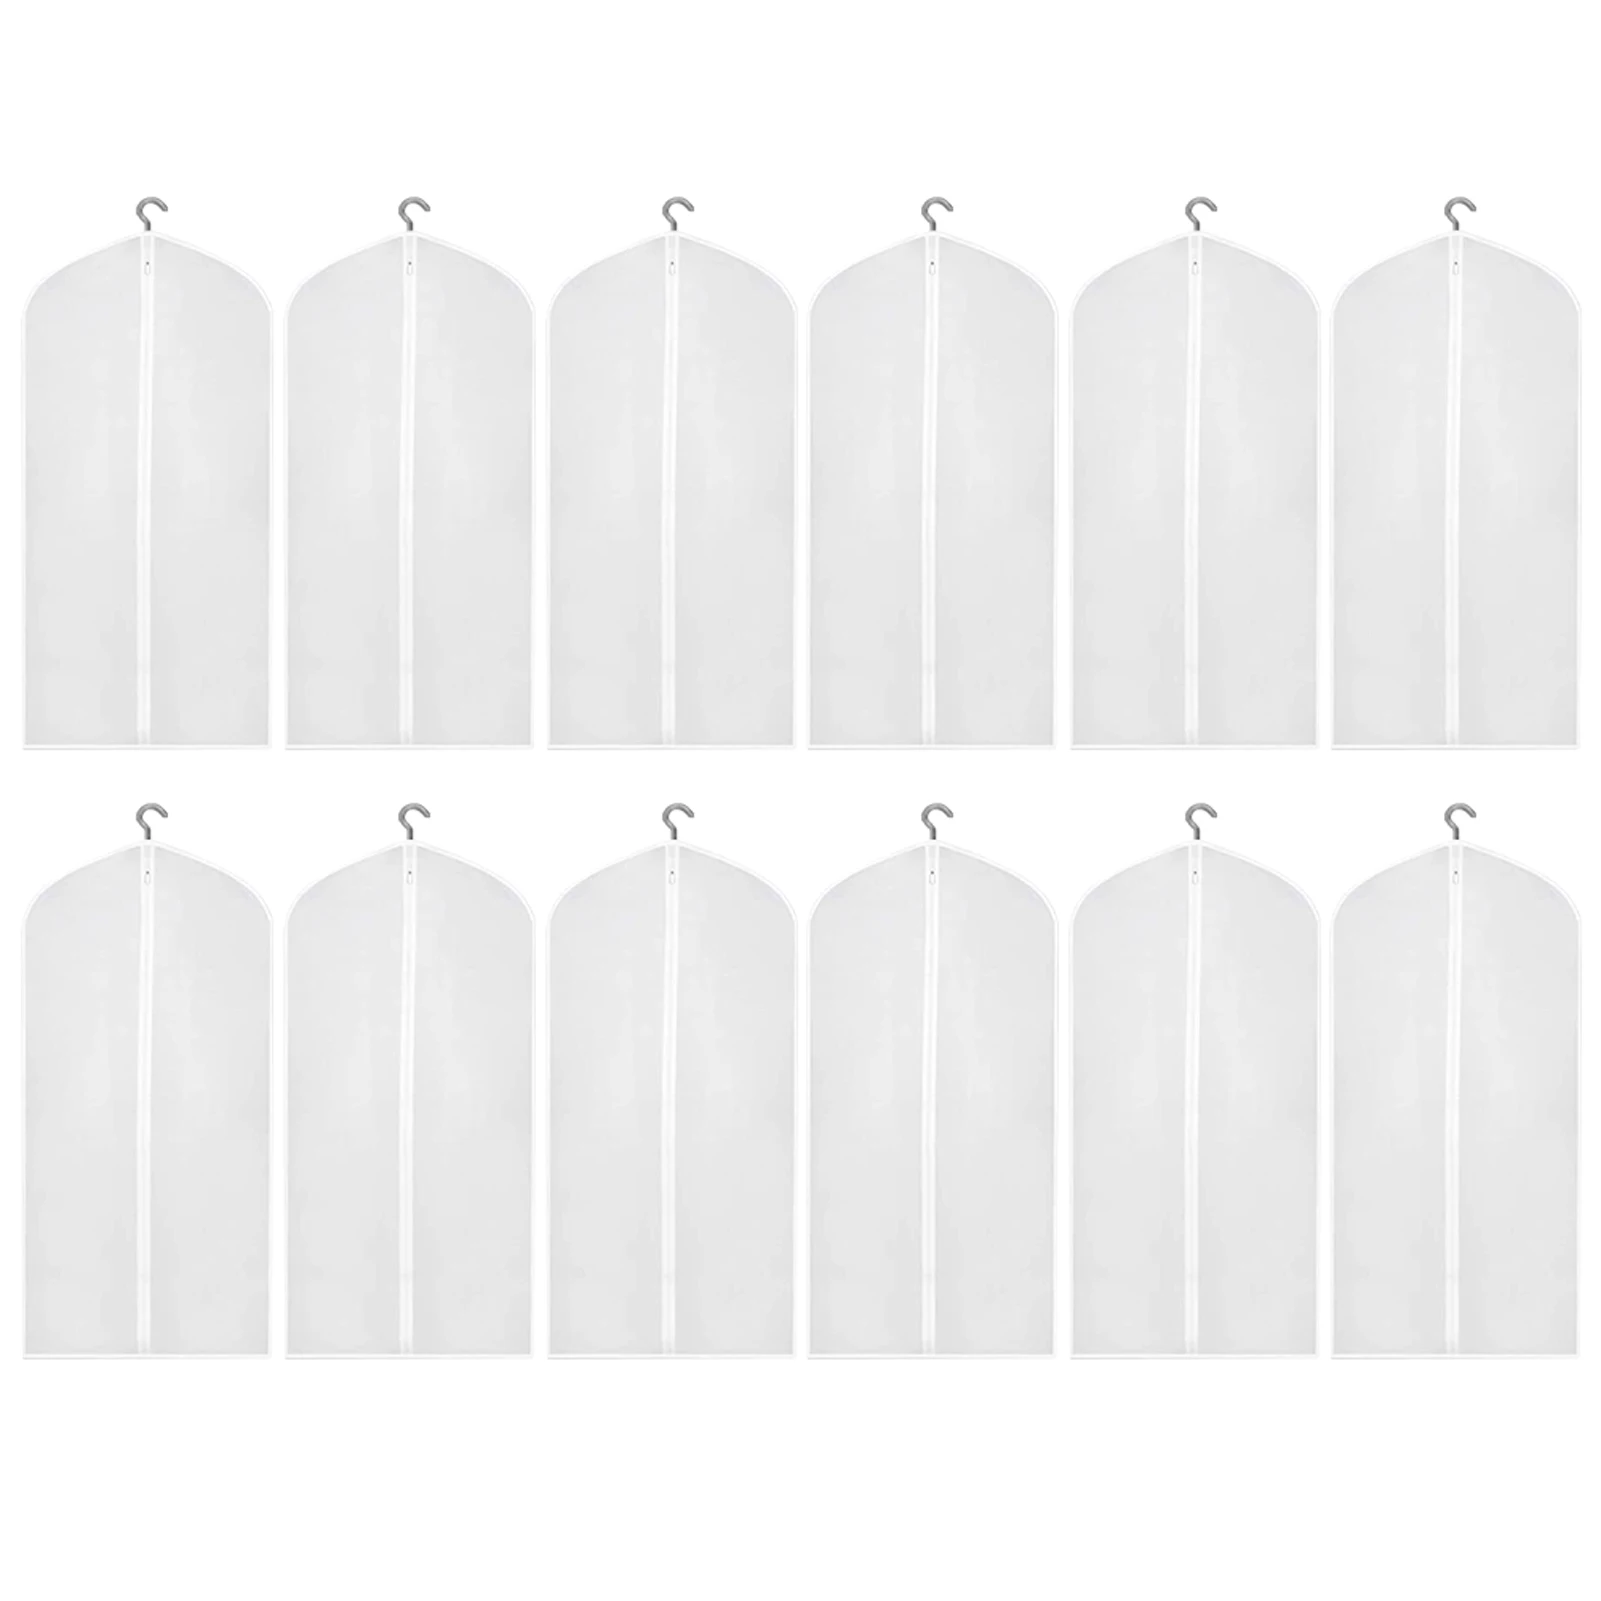 

12pcs Clothing Store Translucent PEVA Universal Garment Bag Home Waterproof Clothes Dust Cover Breathable Daily Hanging Reusable